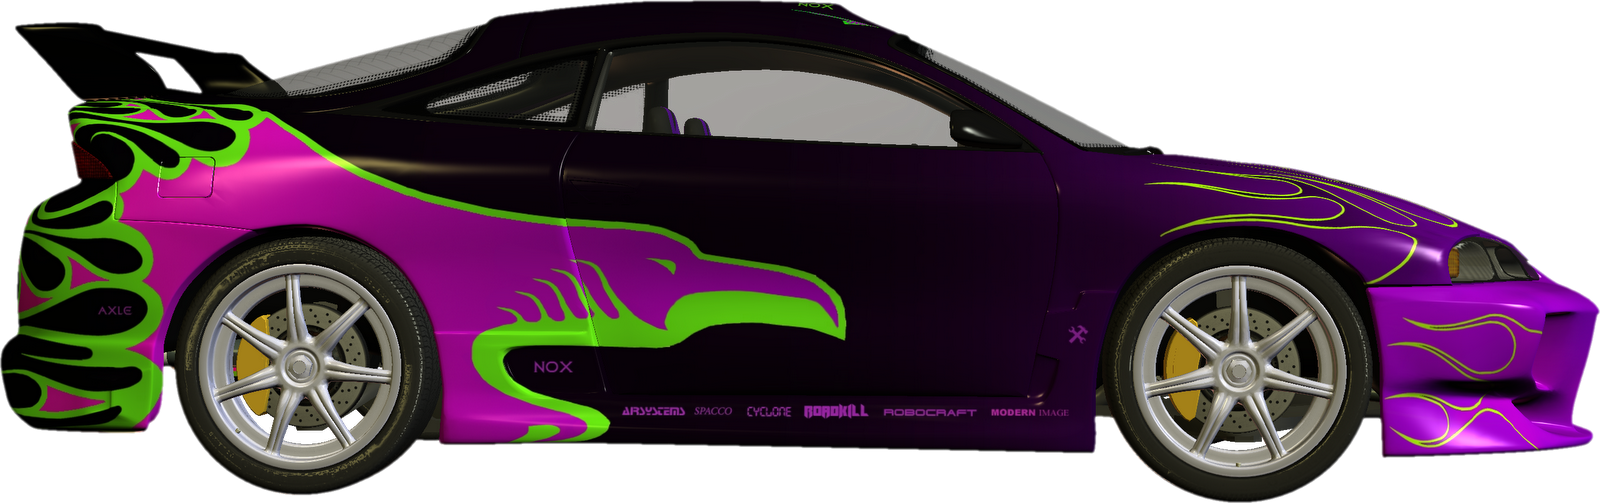 Green clipart sports car. Vehicle purple pencil and